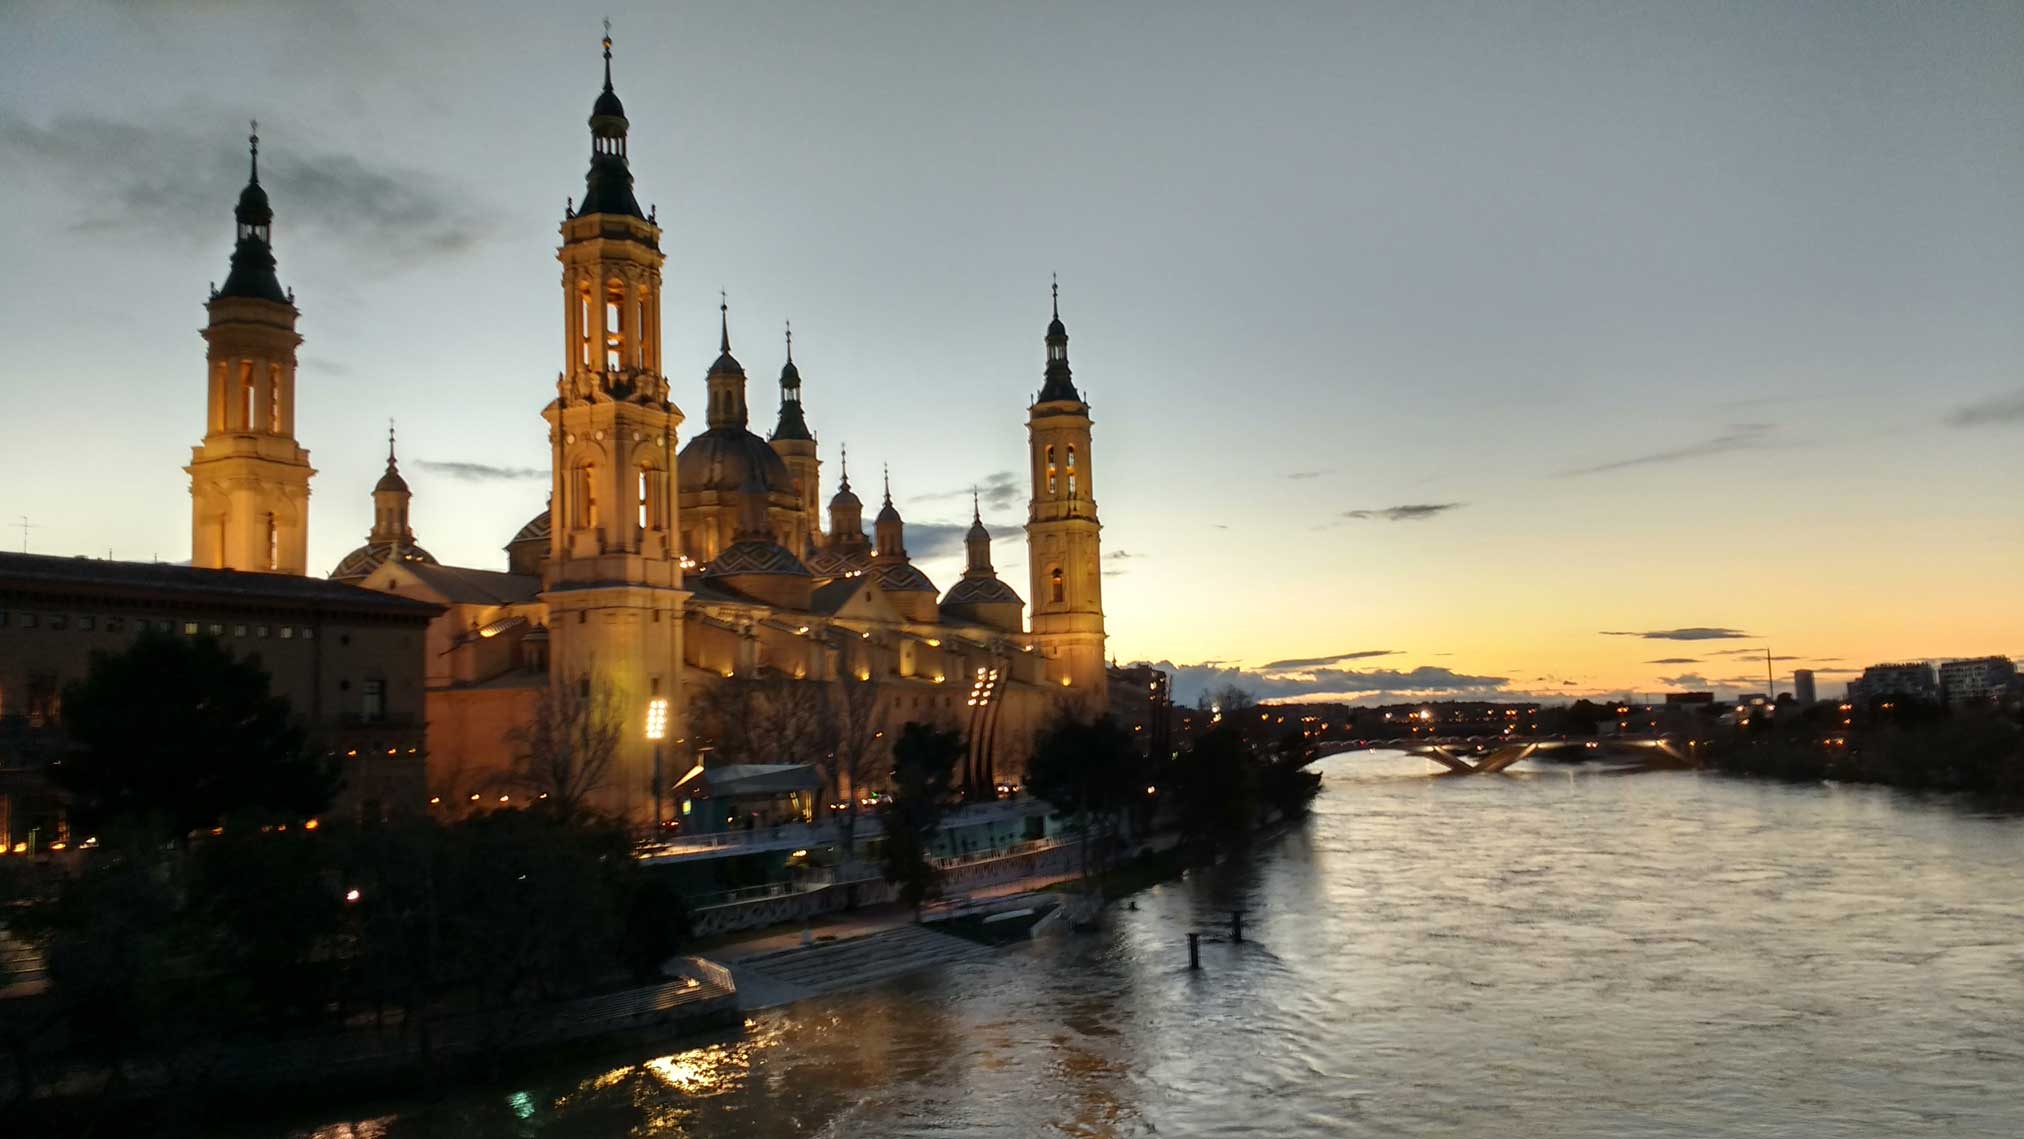 Basilica of our lady of the pilar at night in Zaragoza.